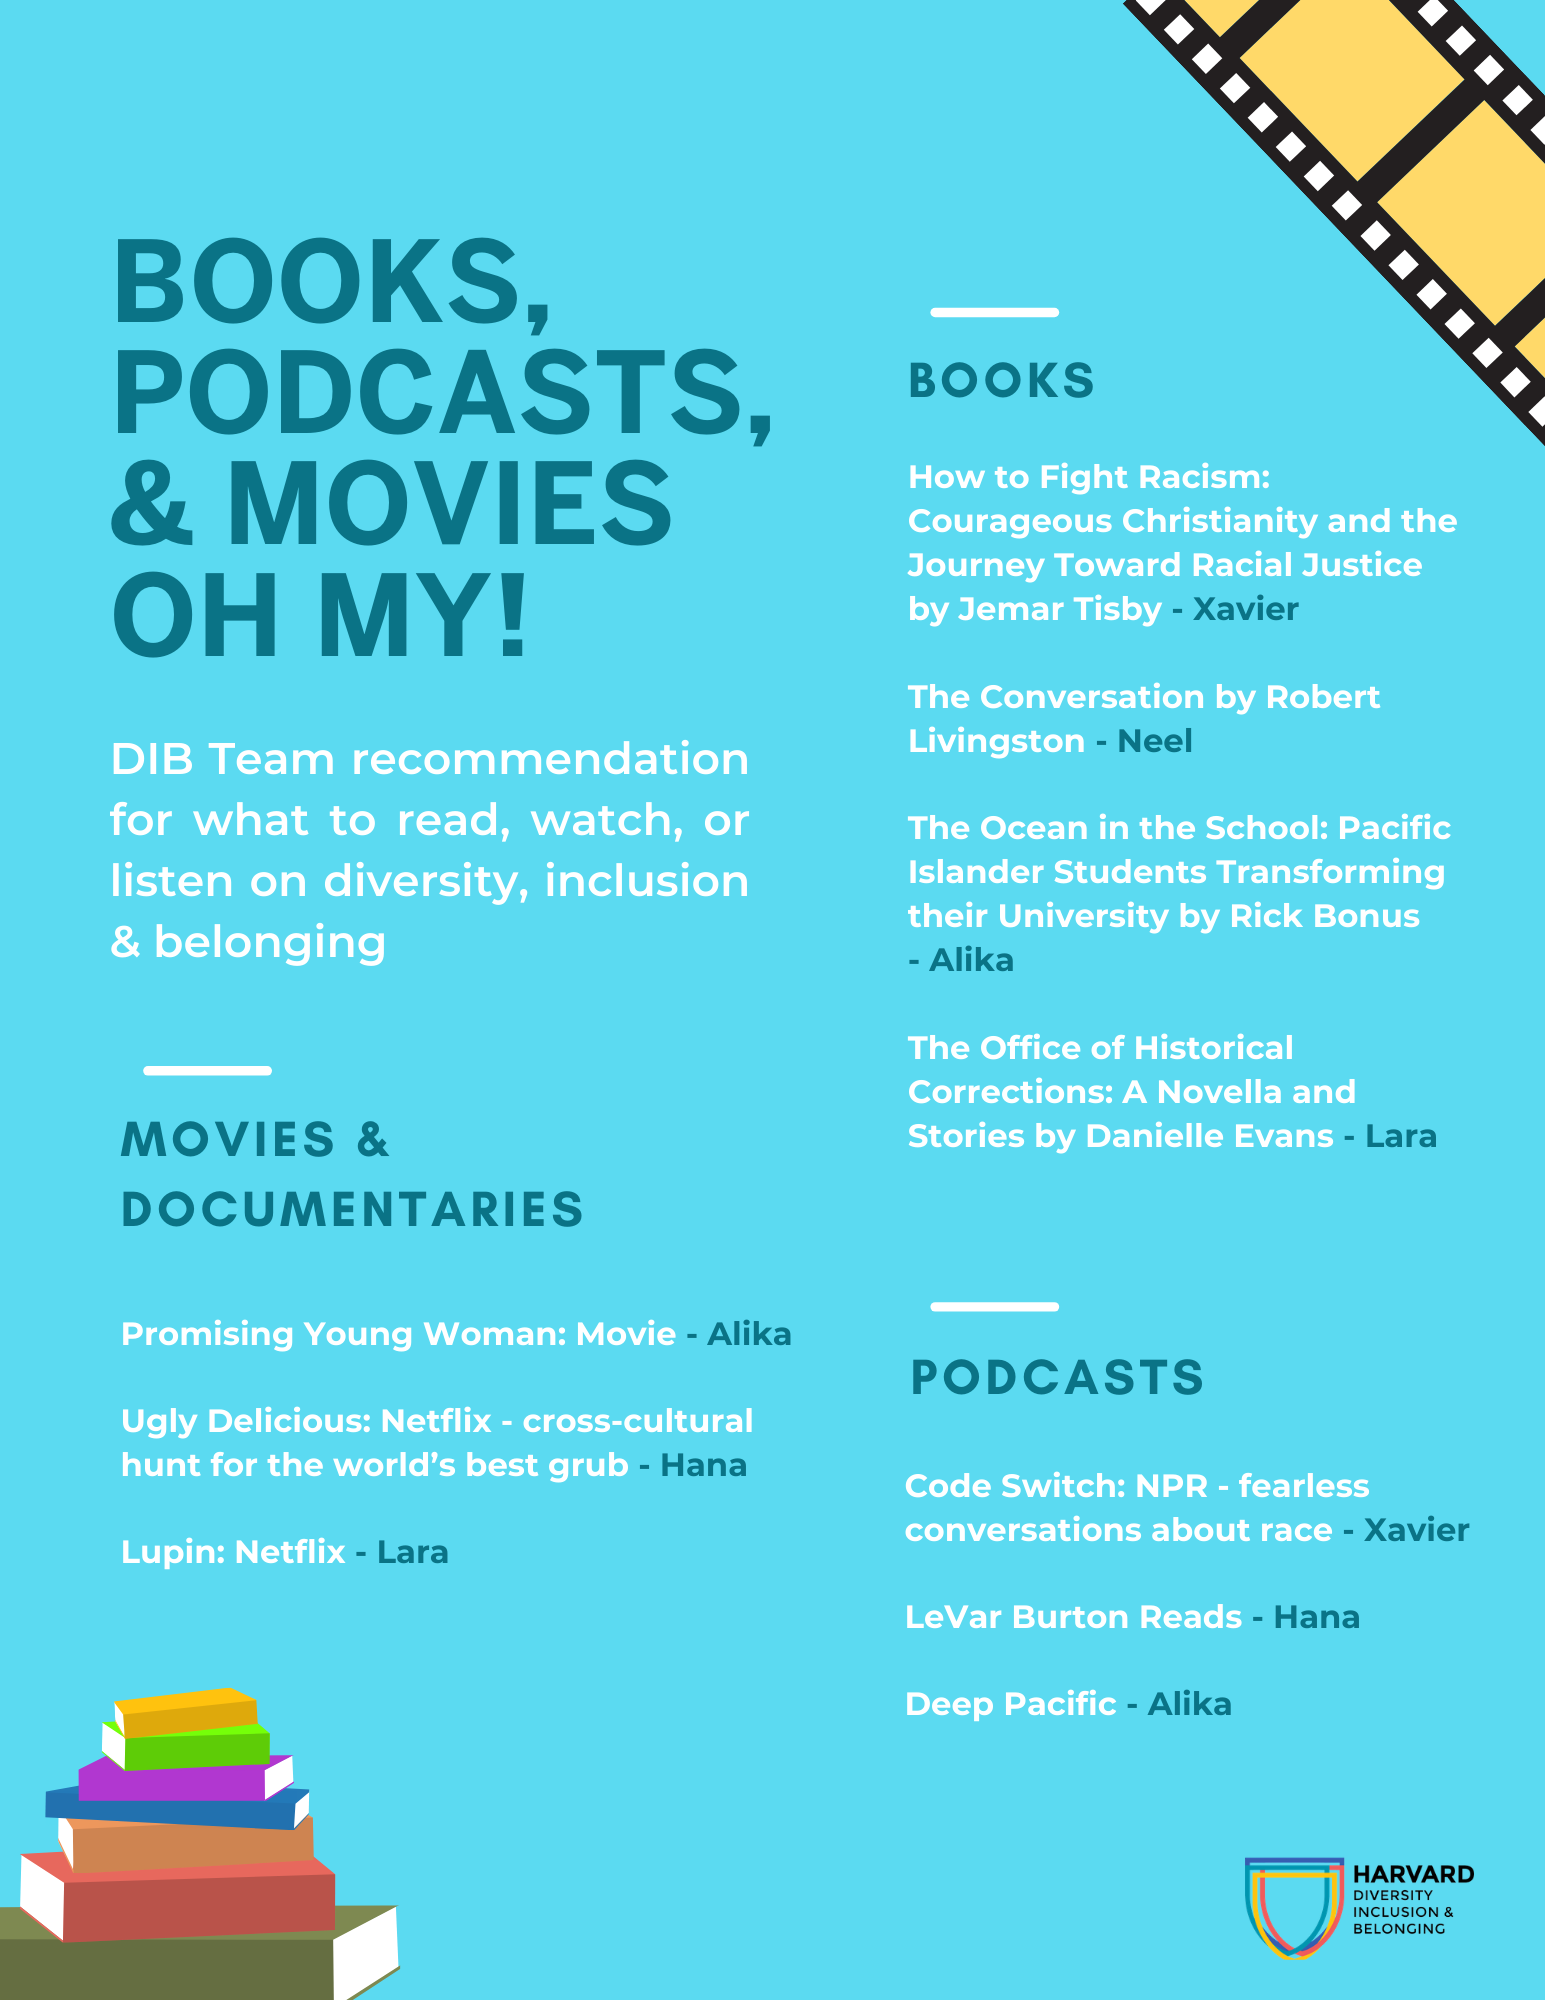 Books, movies and podcasts recommended by select ODIB staff. Accessible version of flyer linked below.